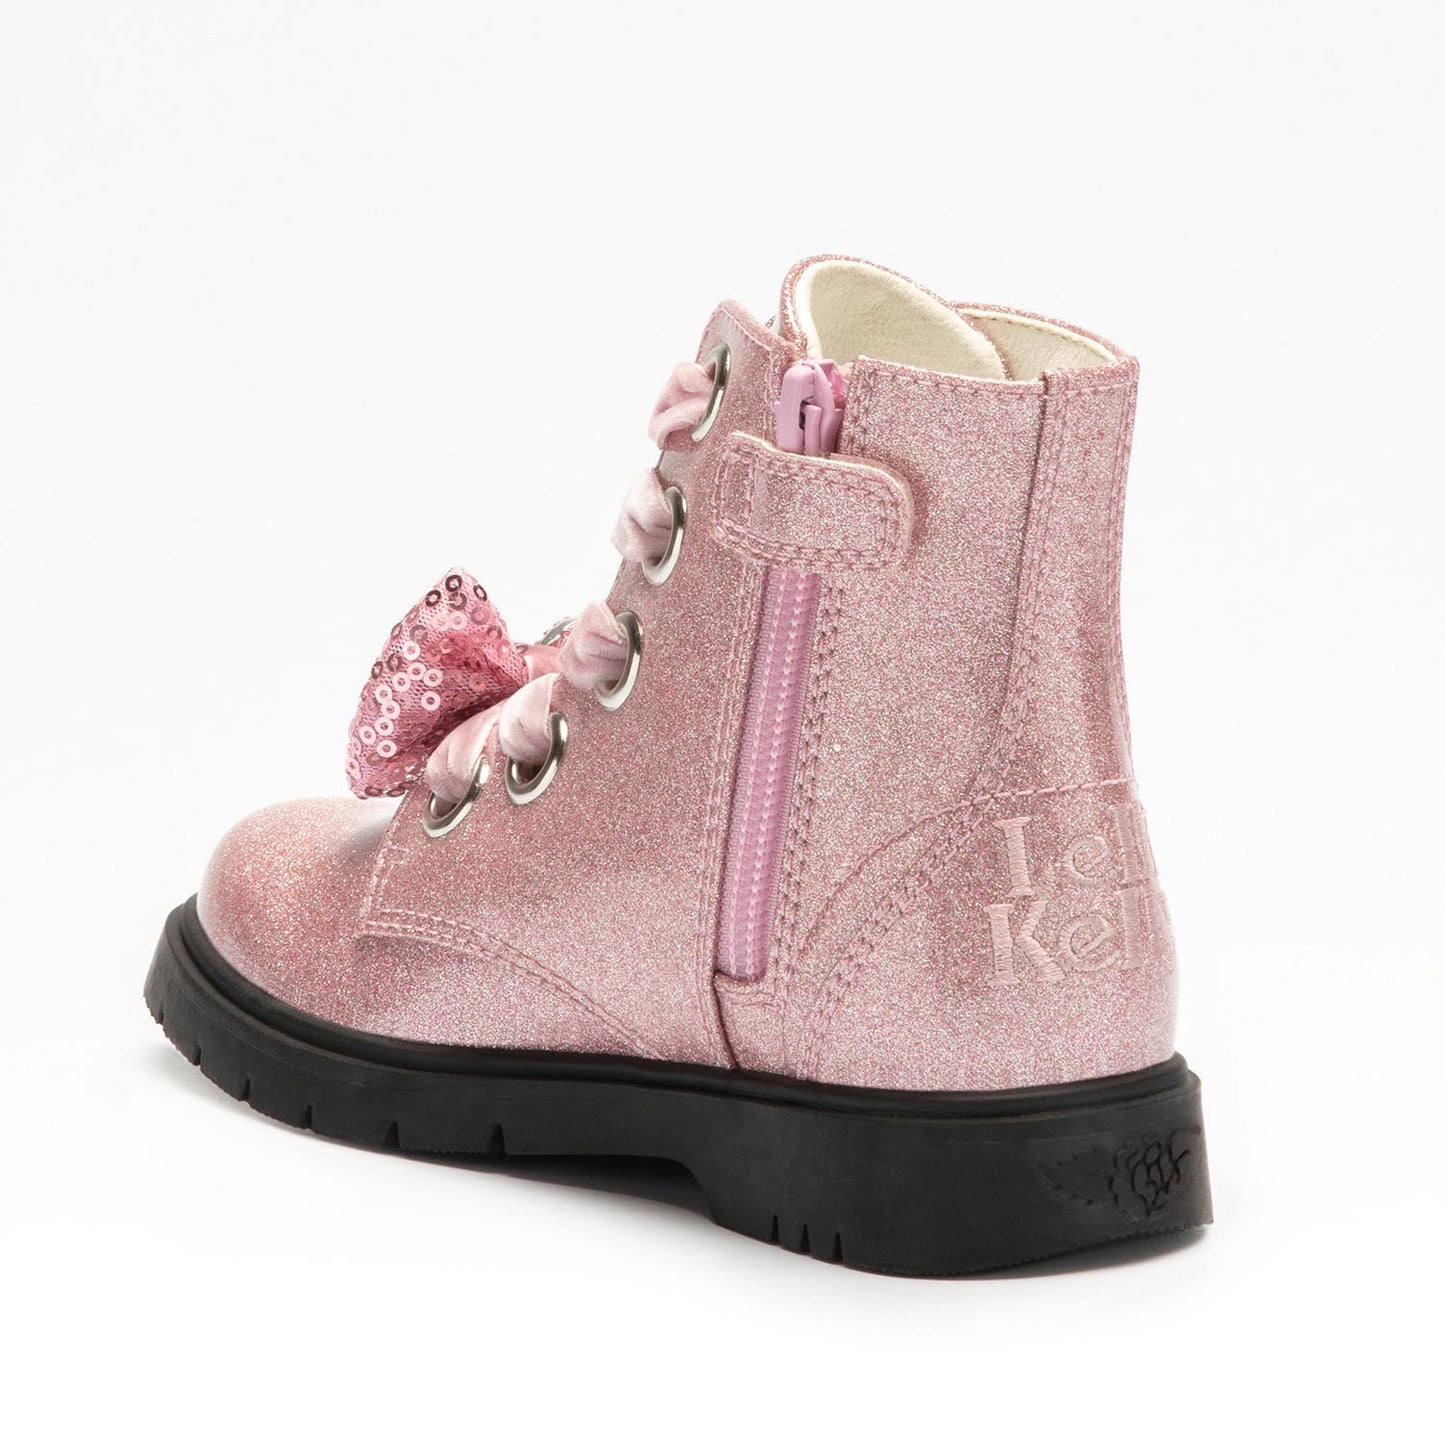 Lelli Kelly Pink Sparkly Bow Boots